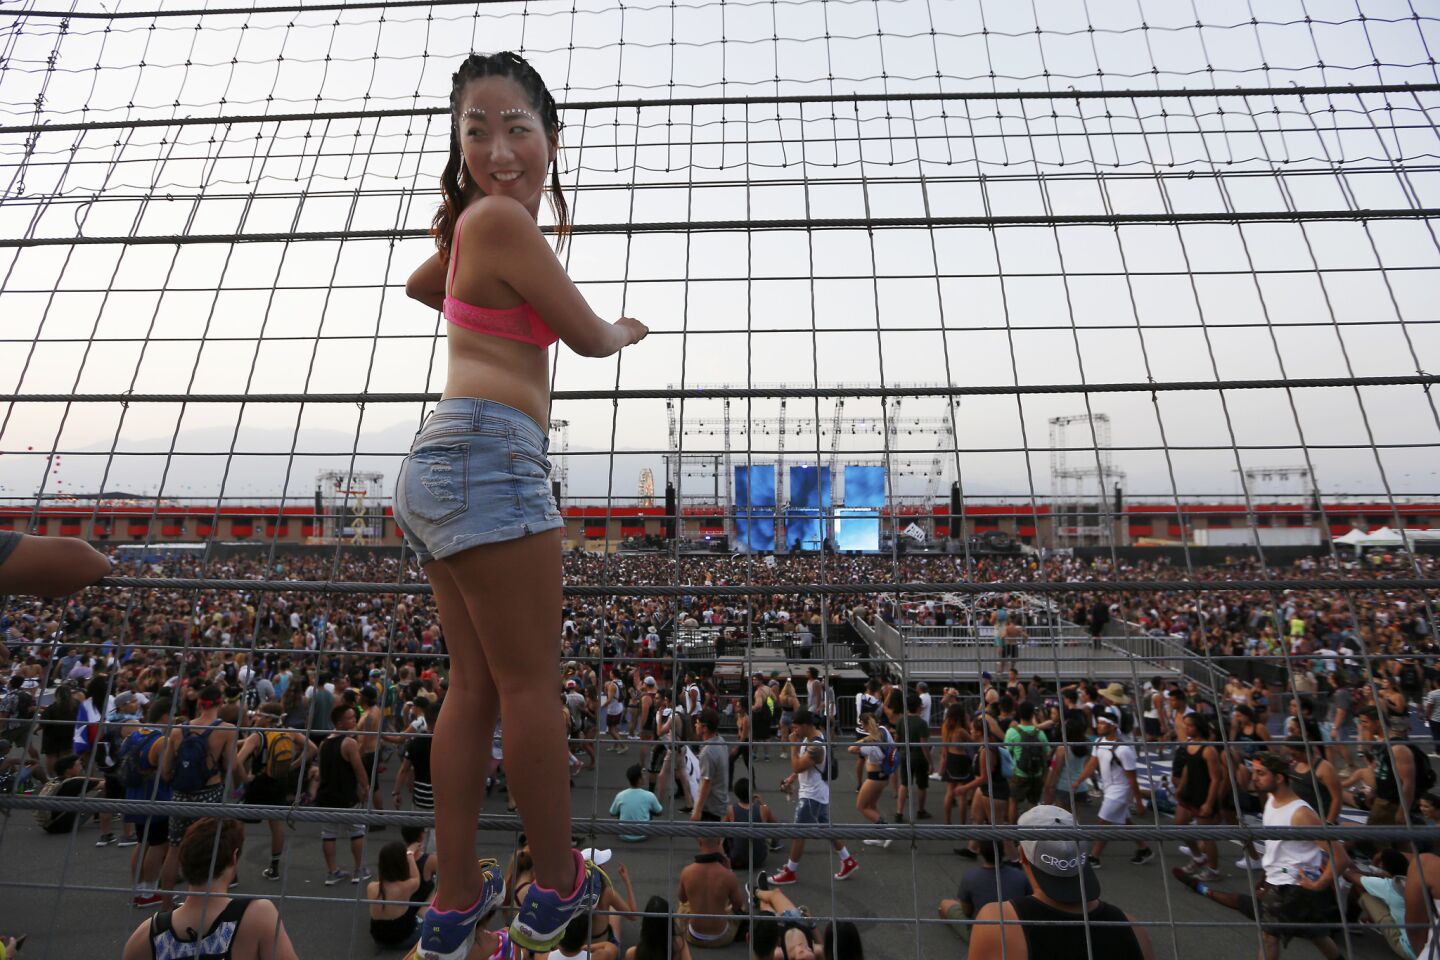 Kana Nan, 20, climbs the fence to get a look at Hard Summer, the Los Angeles dance music festival at the Auto Club Speedway in Fontana.